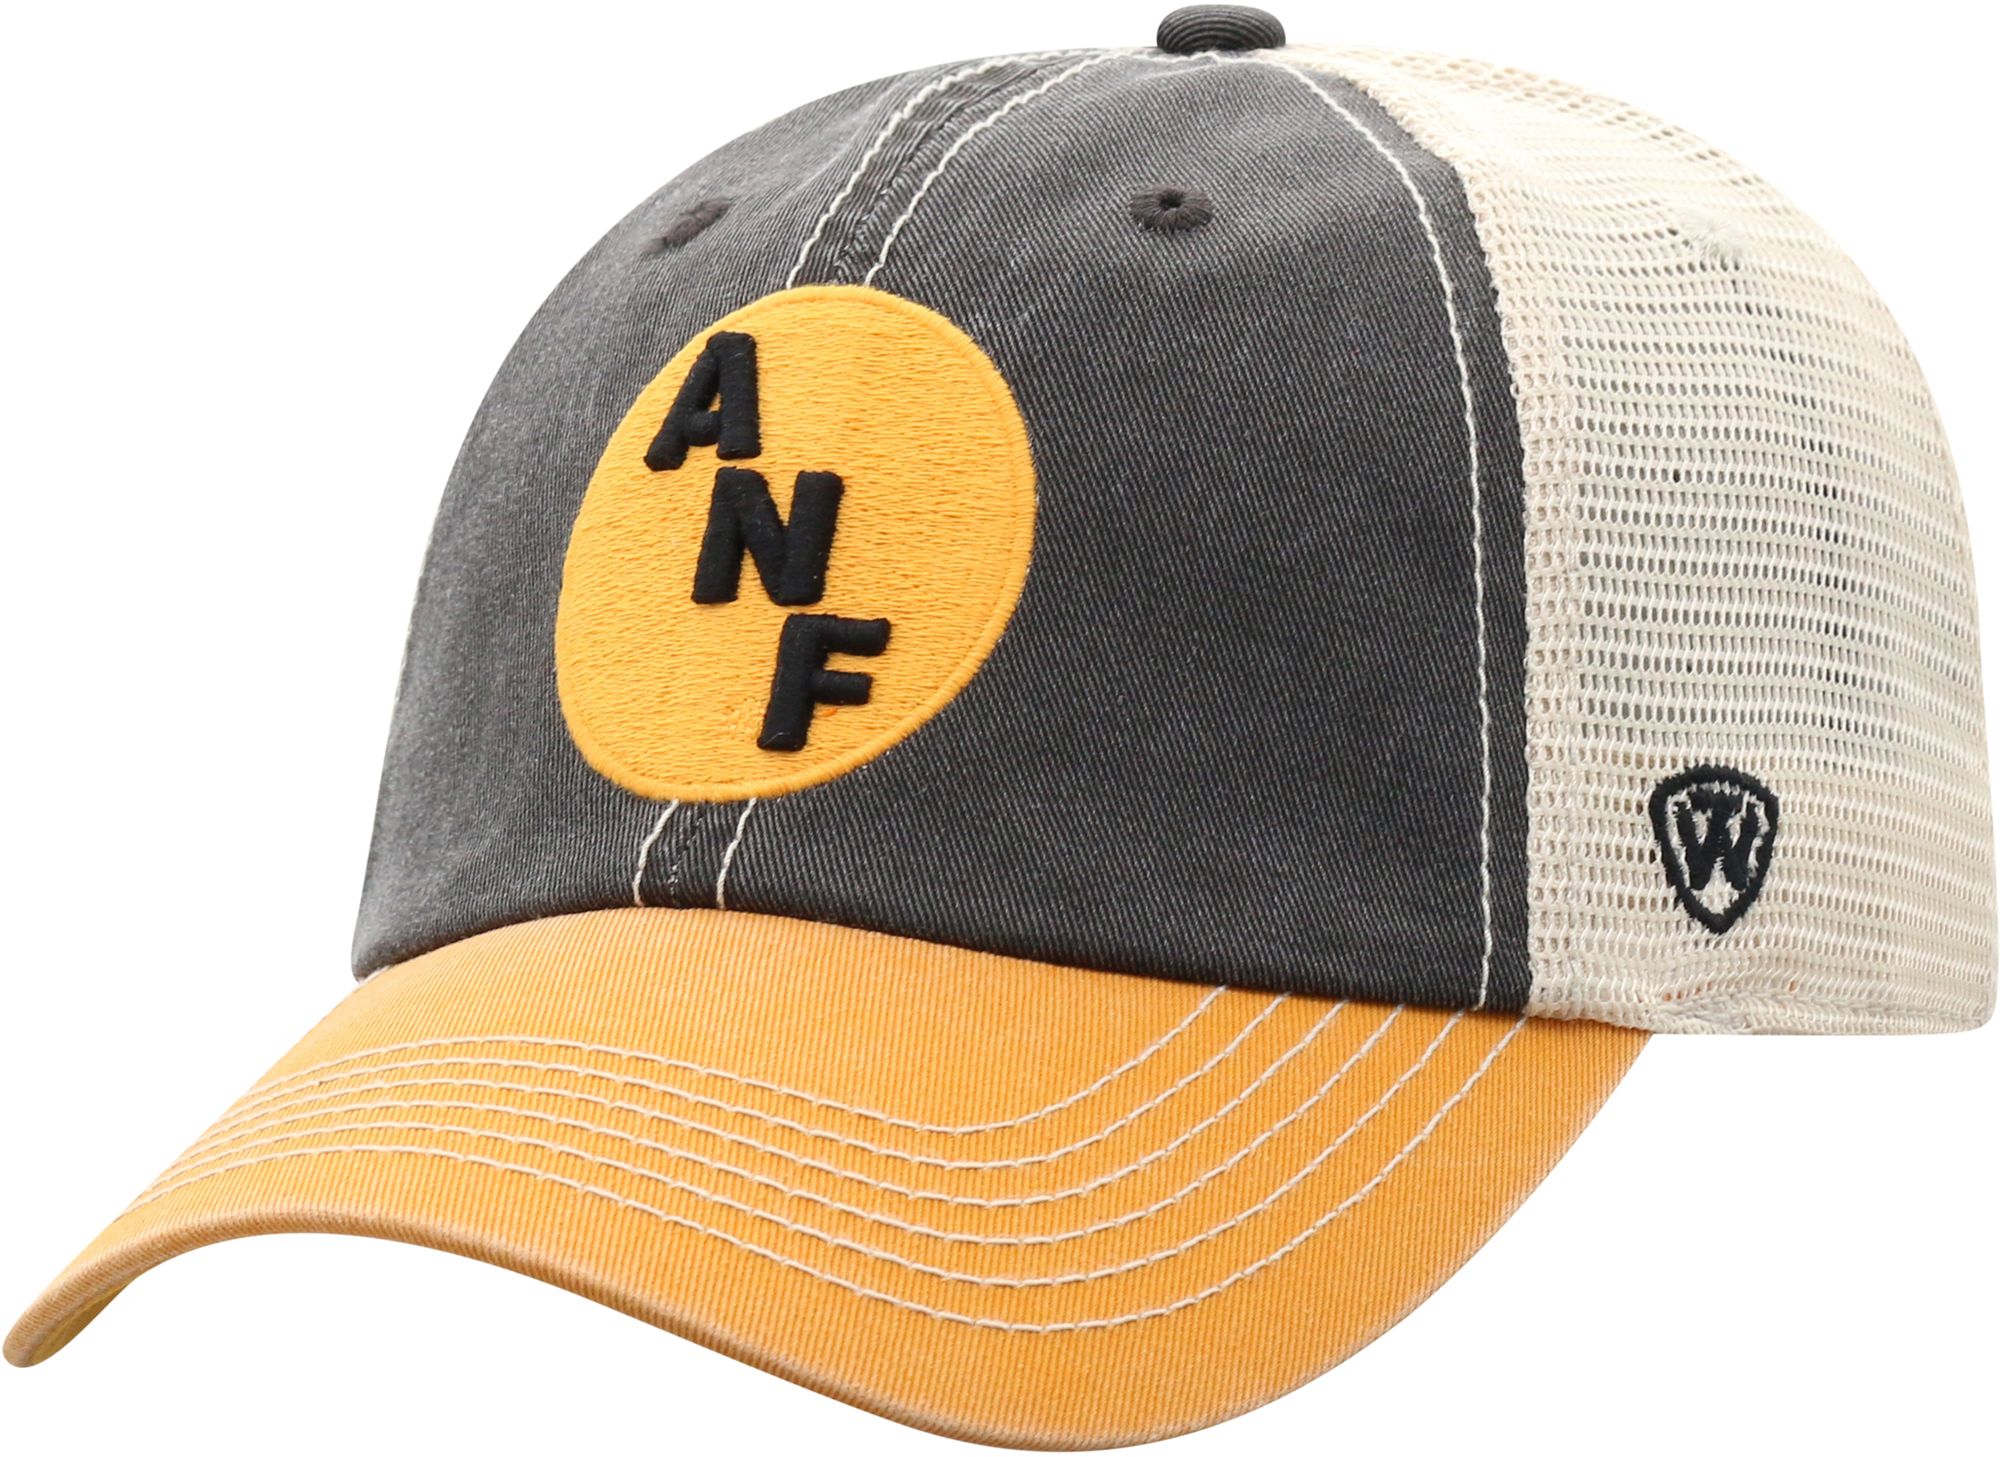 Top of the World Men's Iowa Hawkeyes Farm Strong ANF Off Road Adjustable Hat